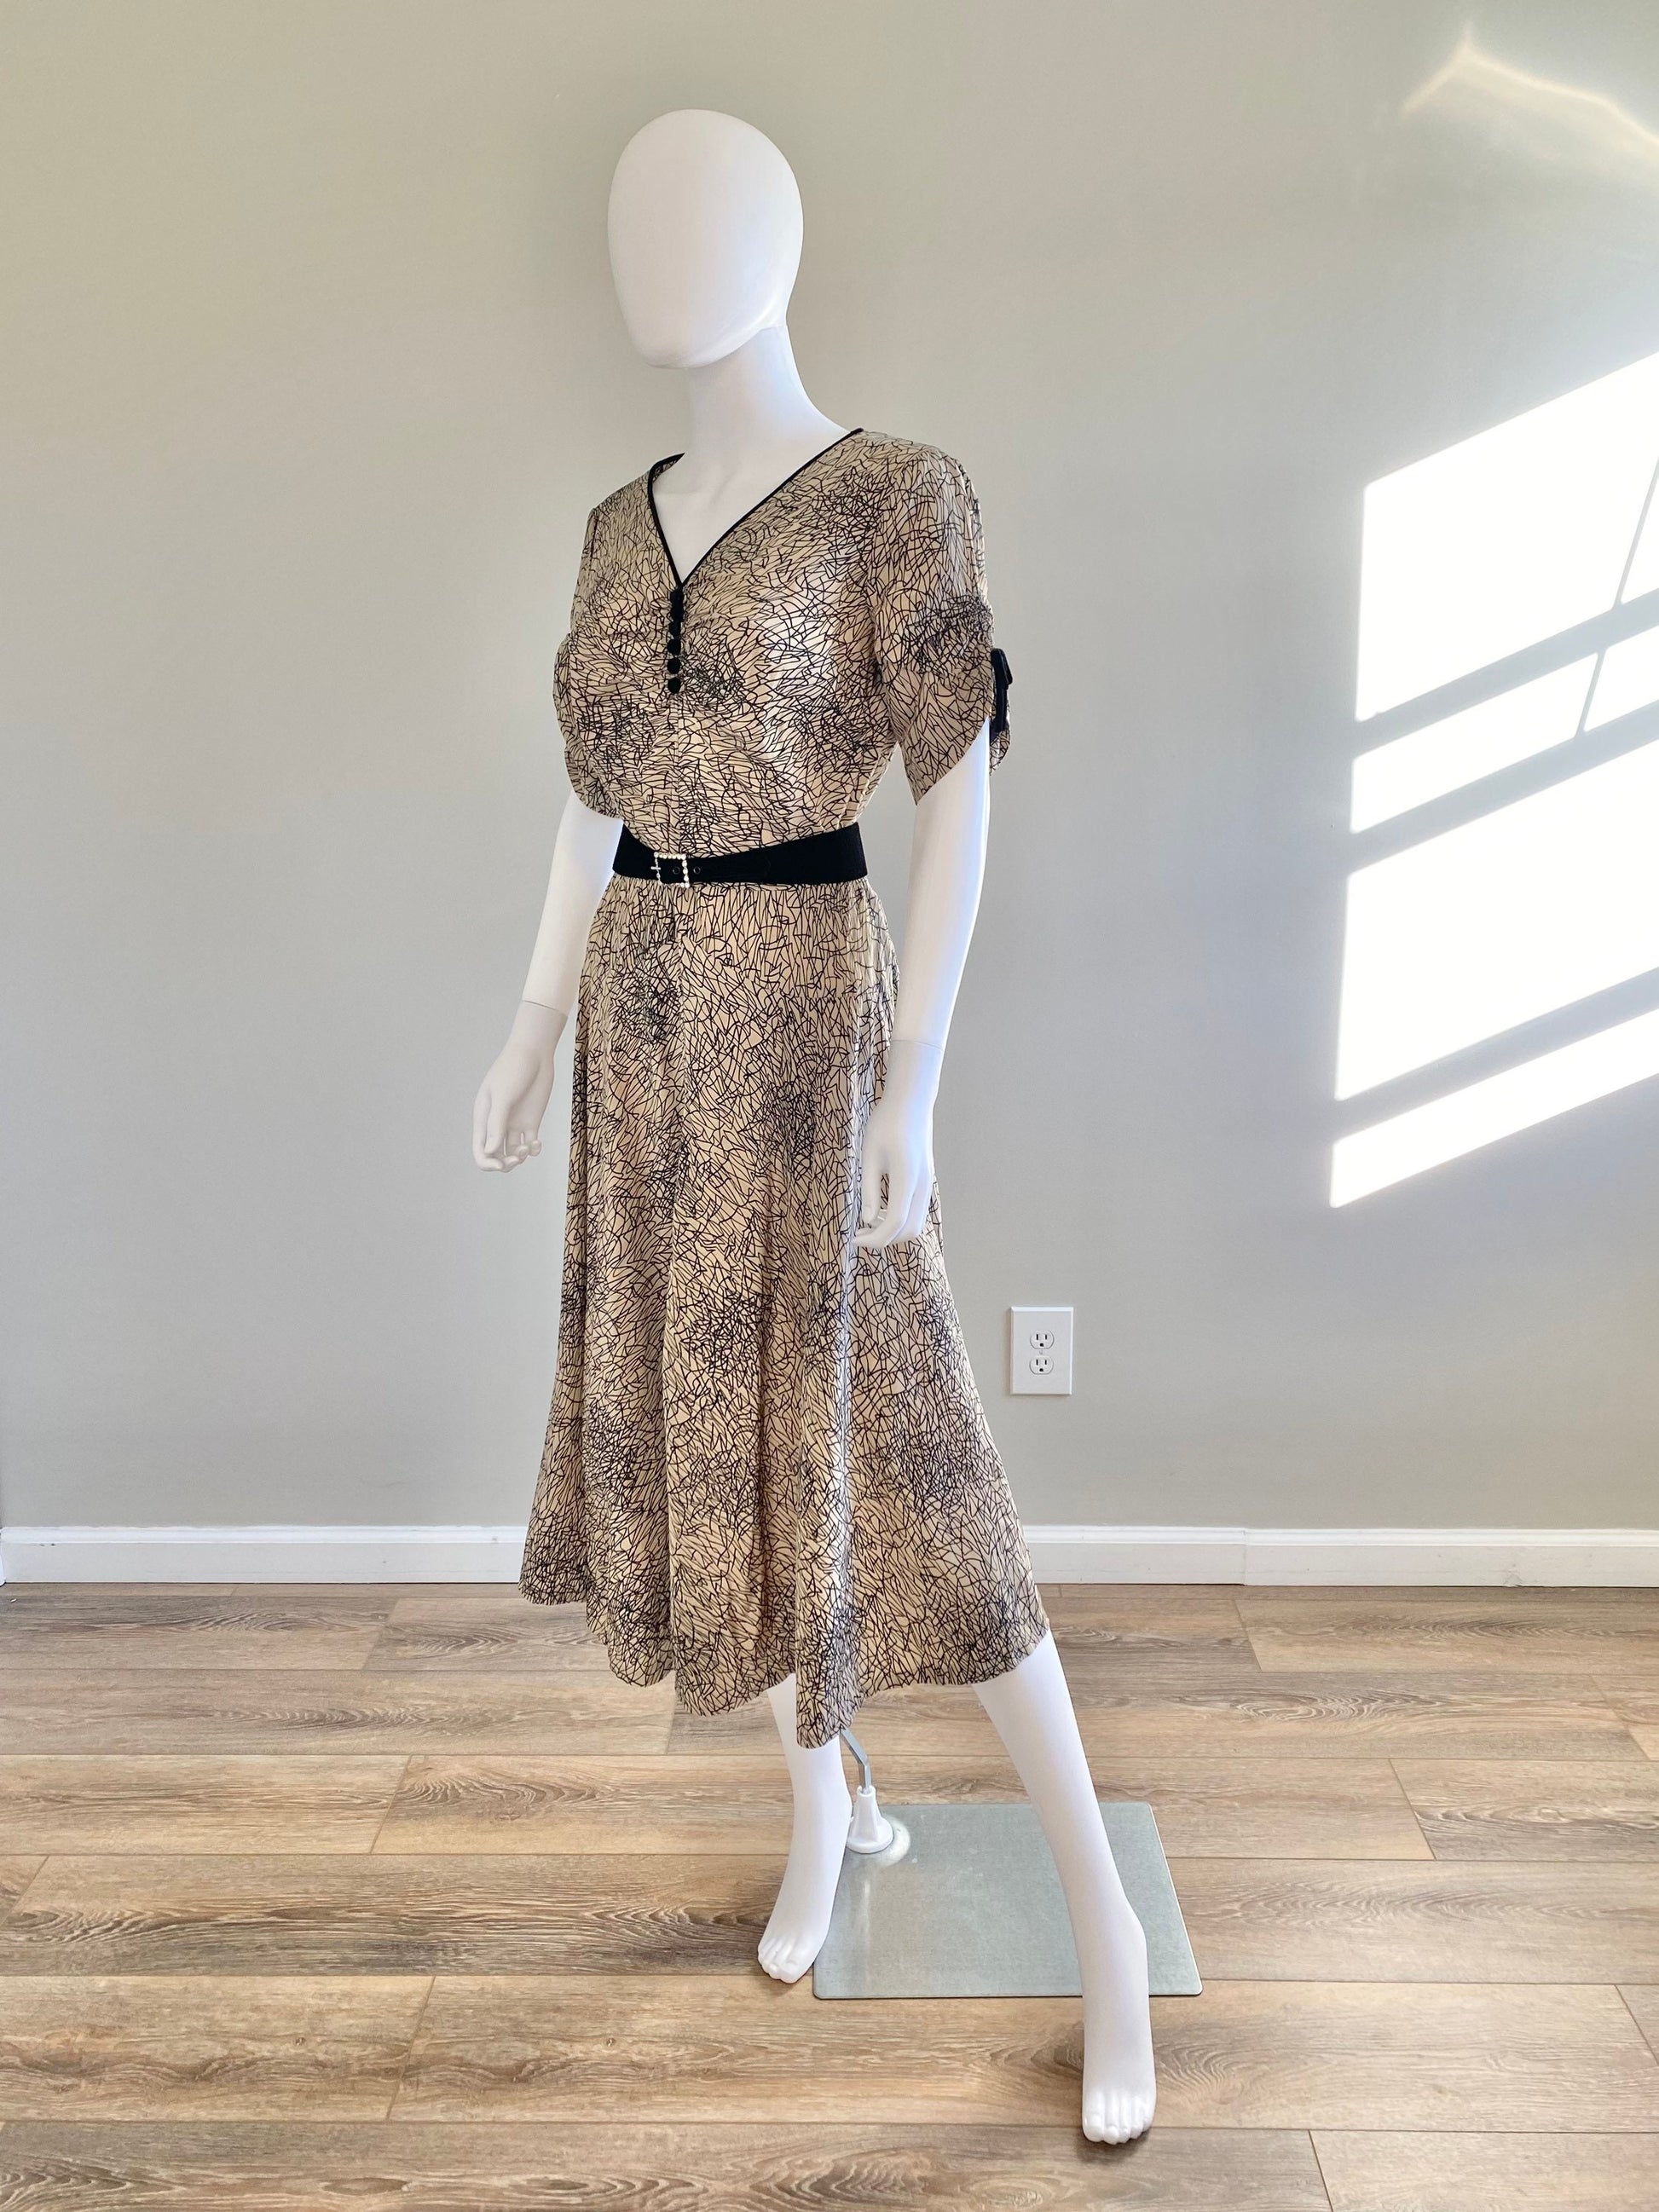 Vintage 1950s Champagne Abstract Print Dress / 50s party dress / 1950s holiday dress / Size M